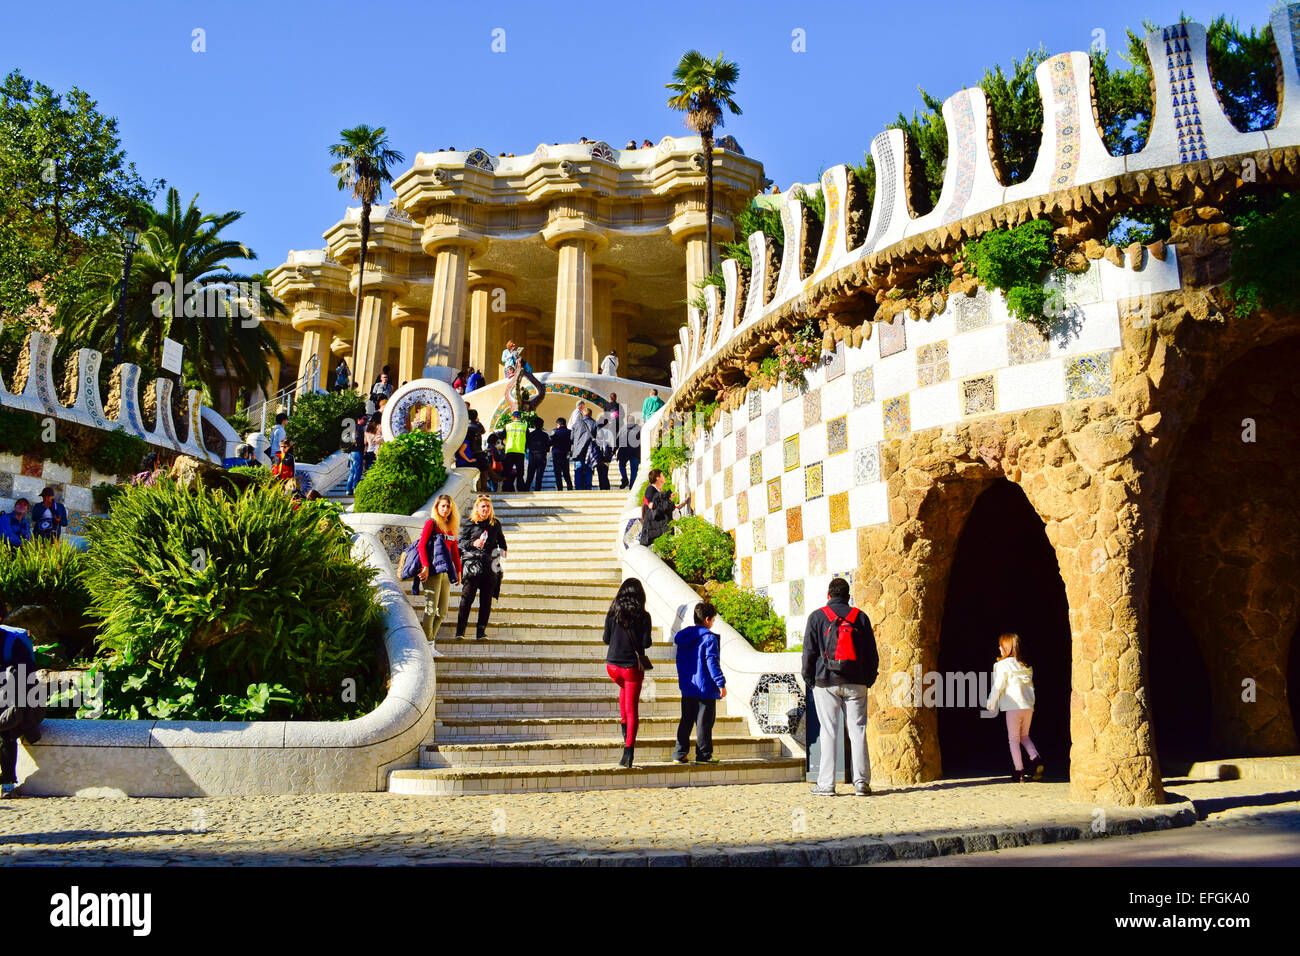 Stairs Antoni Gaudi High Resolution Stock Photography and Images - Alamy